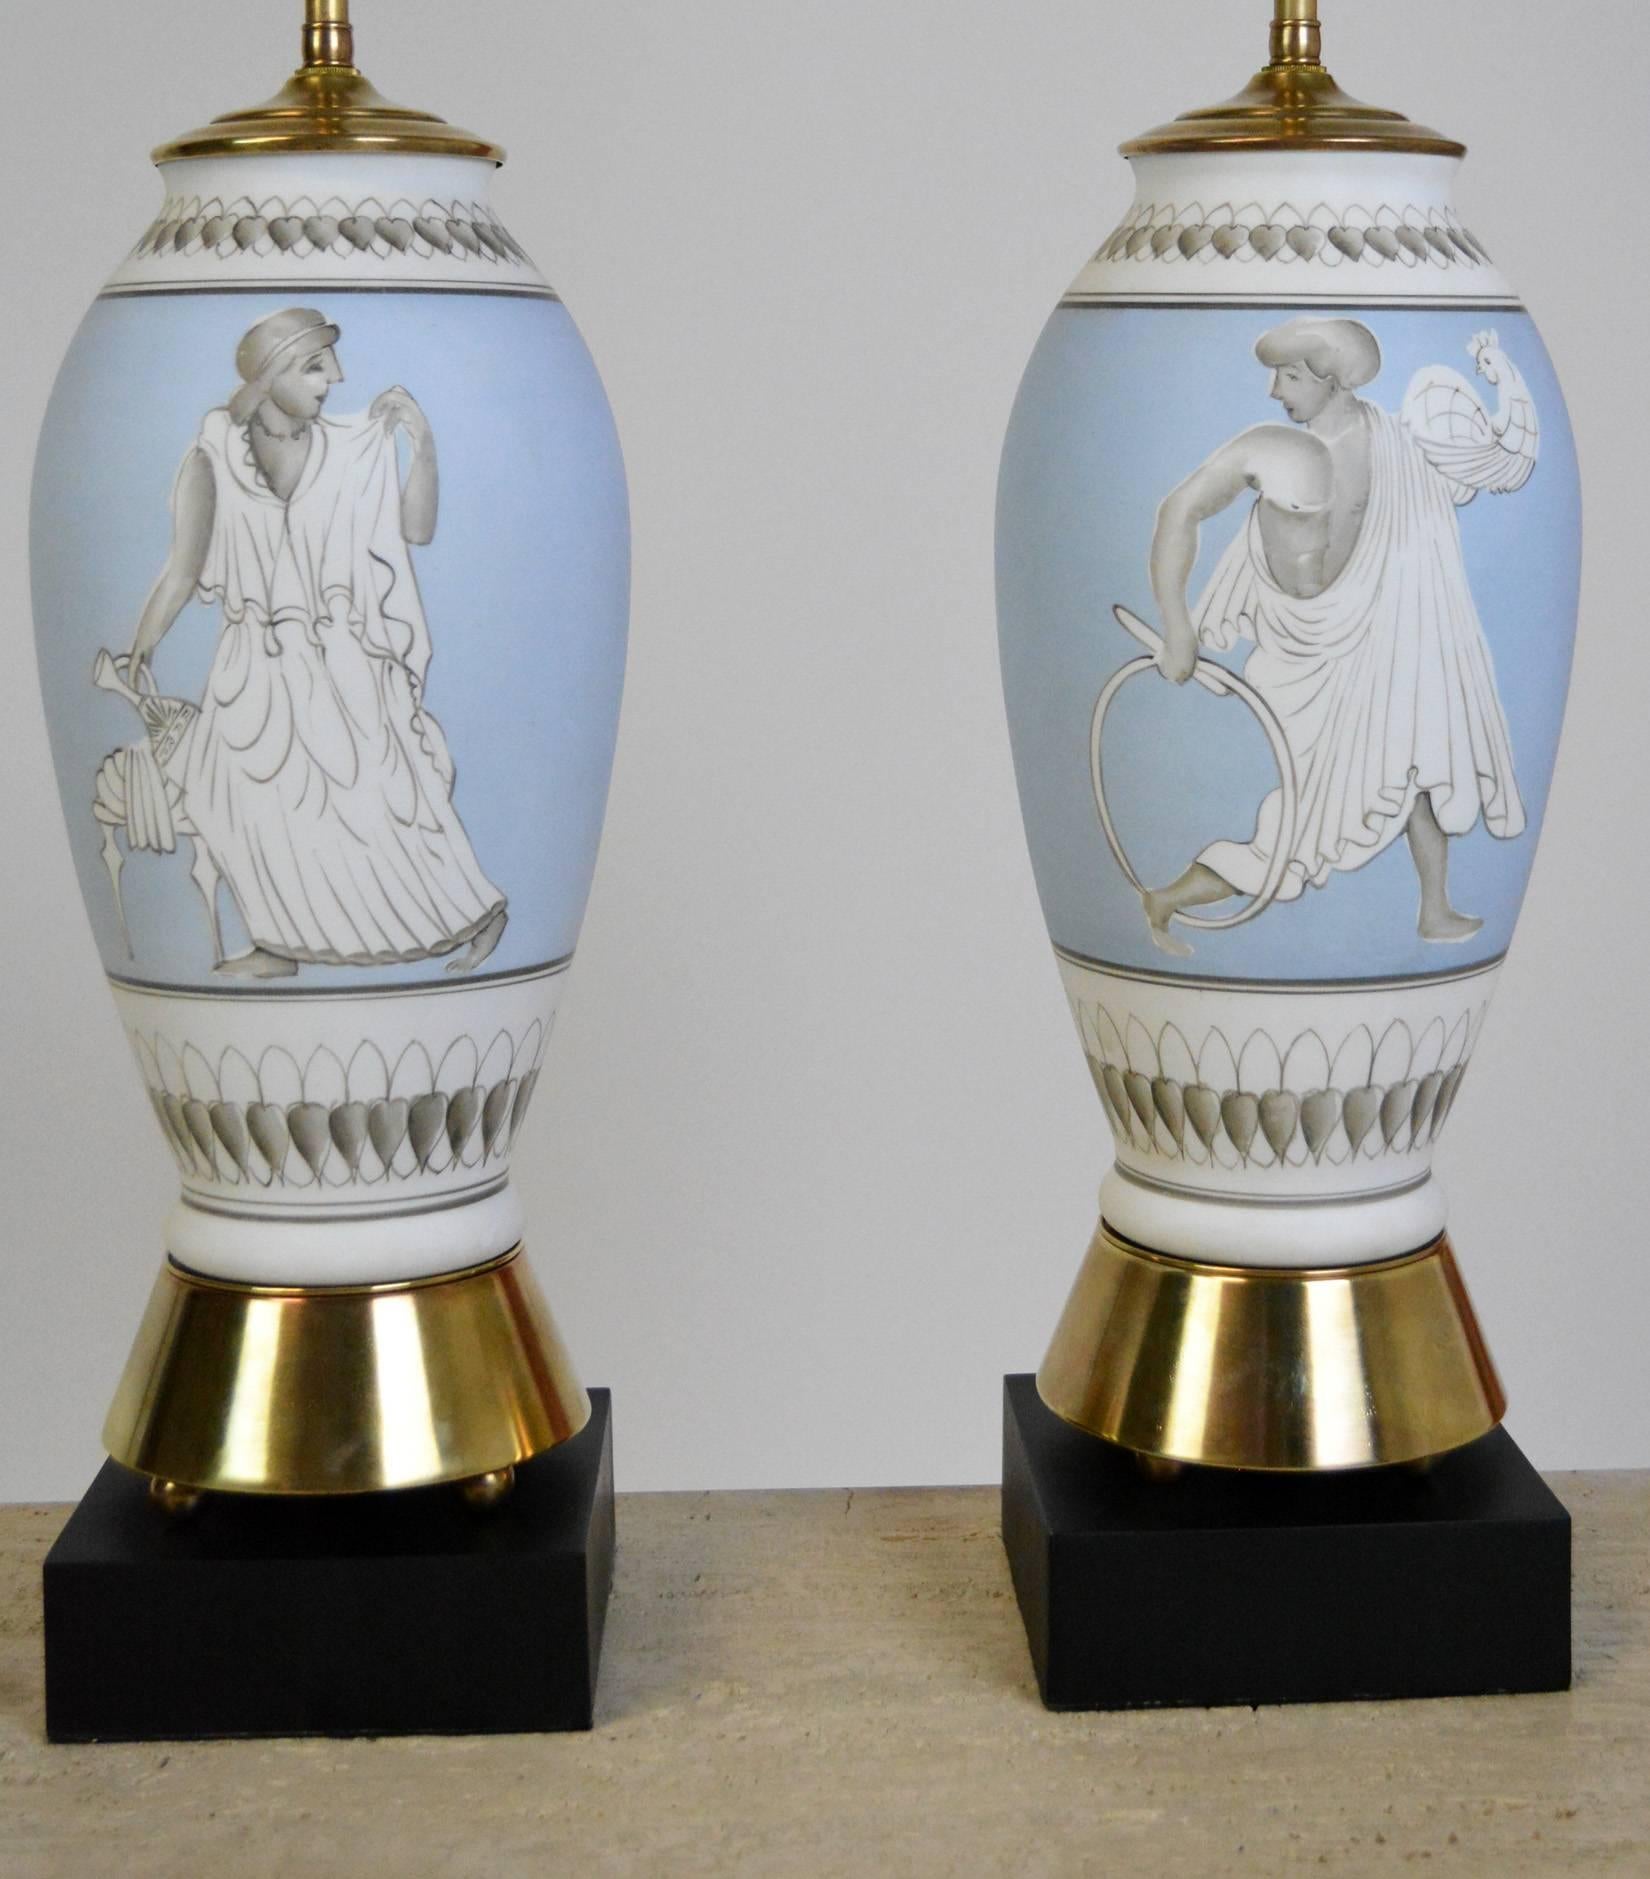 A pair of lamps with matte glazed ceramic in cornflower blue and white with grey decoration. Each lamp is unique, with a hand drawn classical figure in Roman togas. Rewired with new double cluster sockets and original mounts polished.